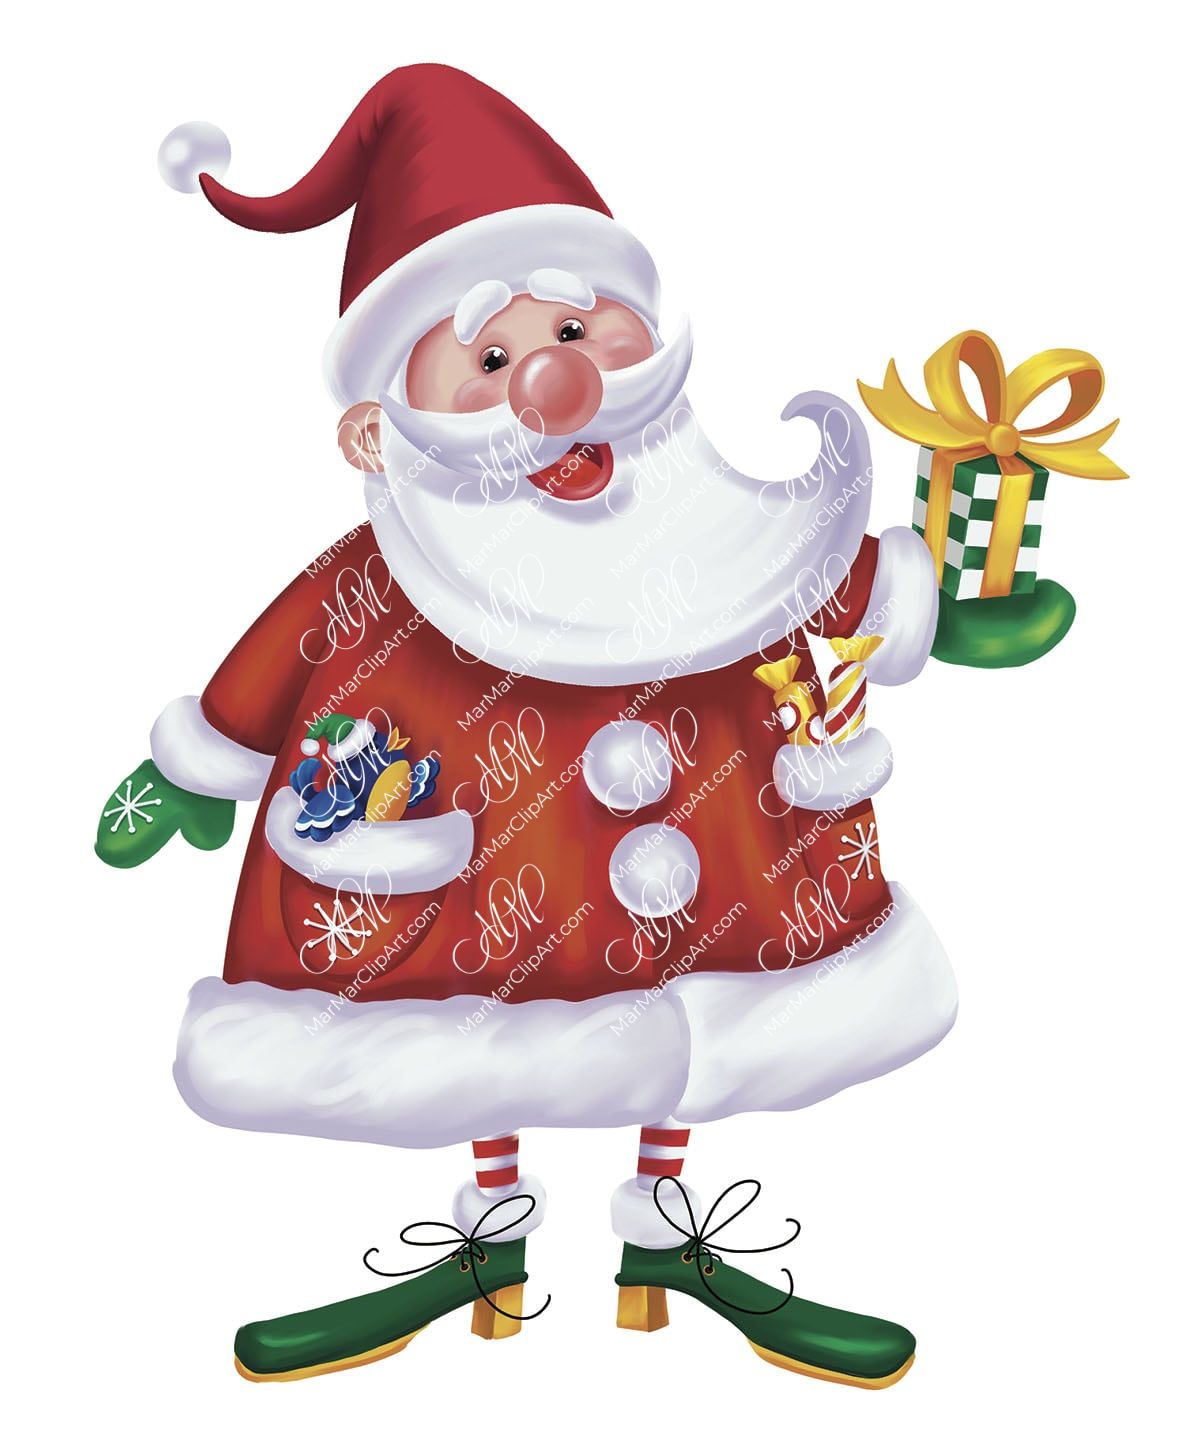 Santa Claus with gift. Digital royalty-free illustration. Printable file isolated on white background